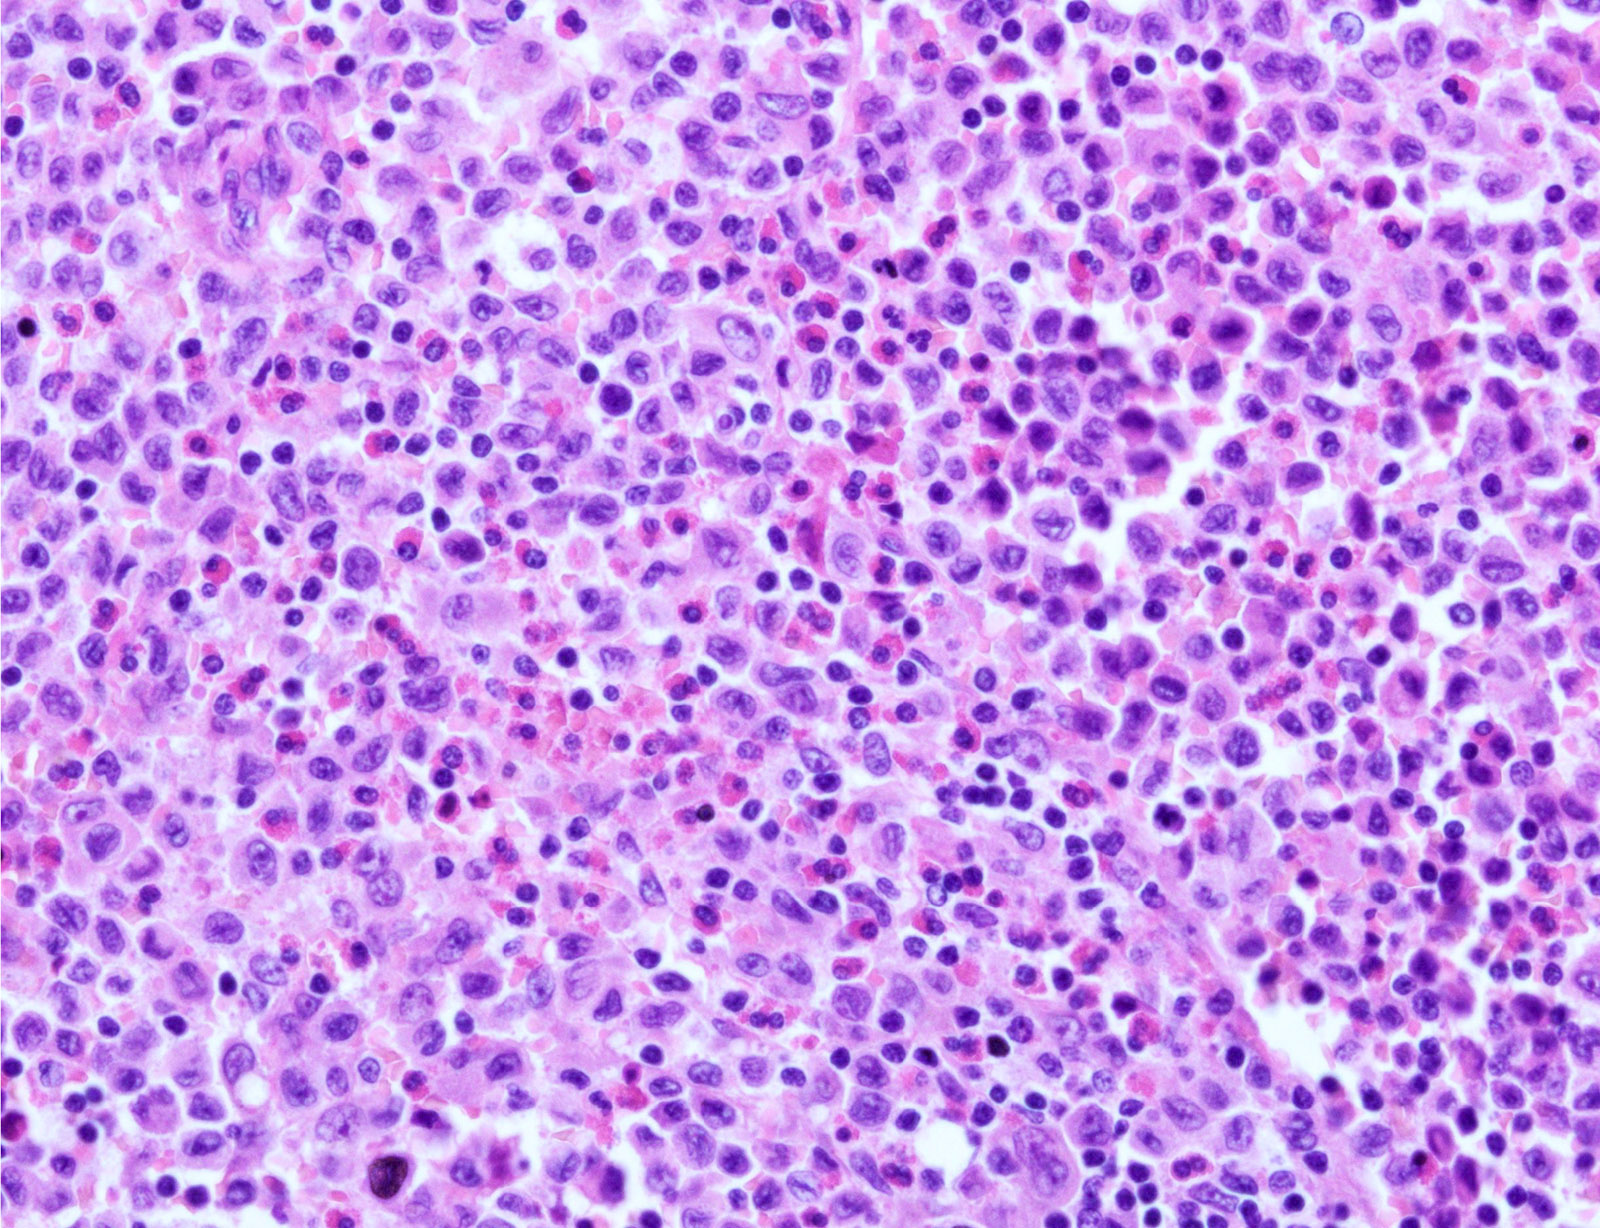 LCH cells and eosinophils